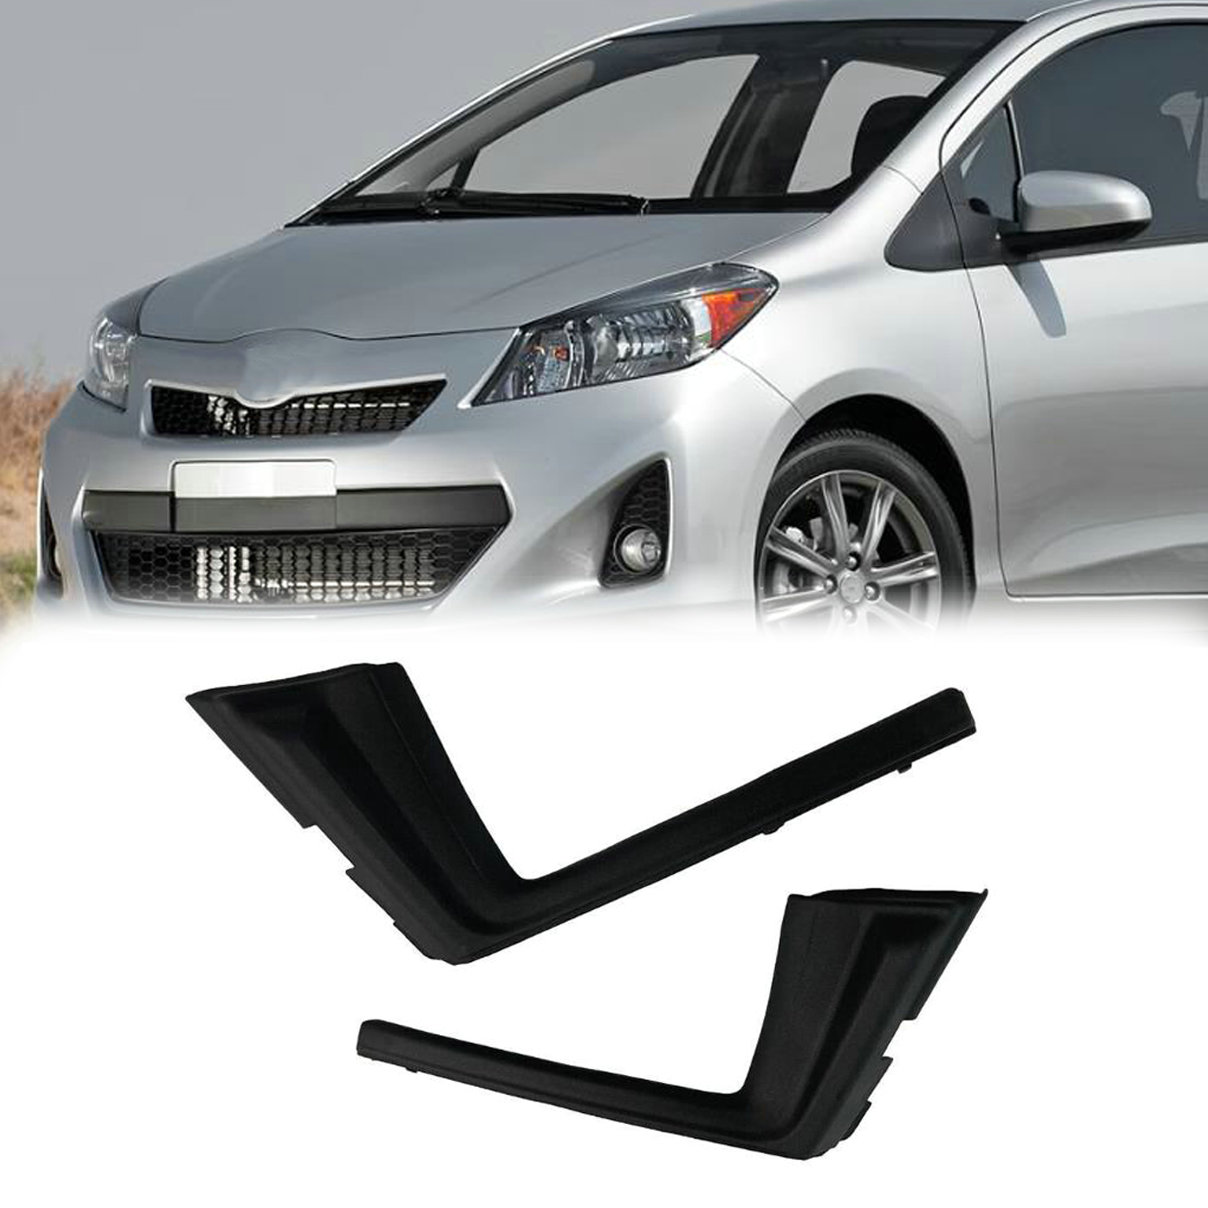 2x Front Windshield Wrap Corner Trim Cover For Toyota Yaris 2006-2010 Vios  08-12